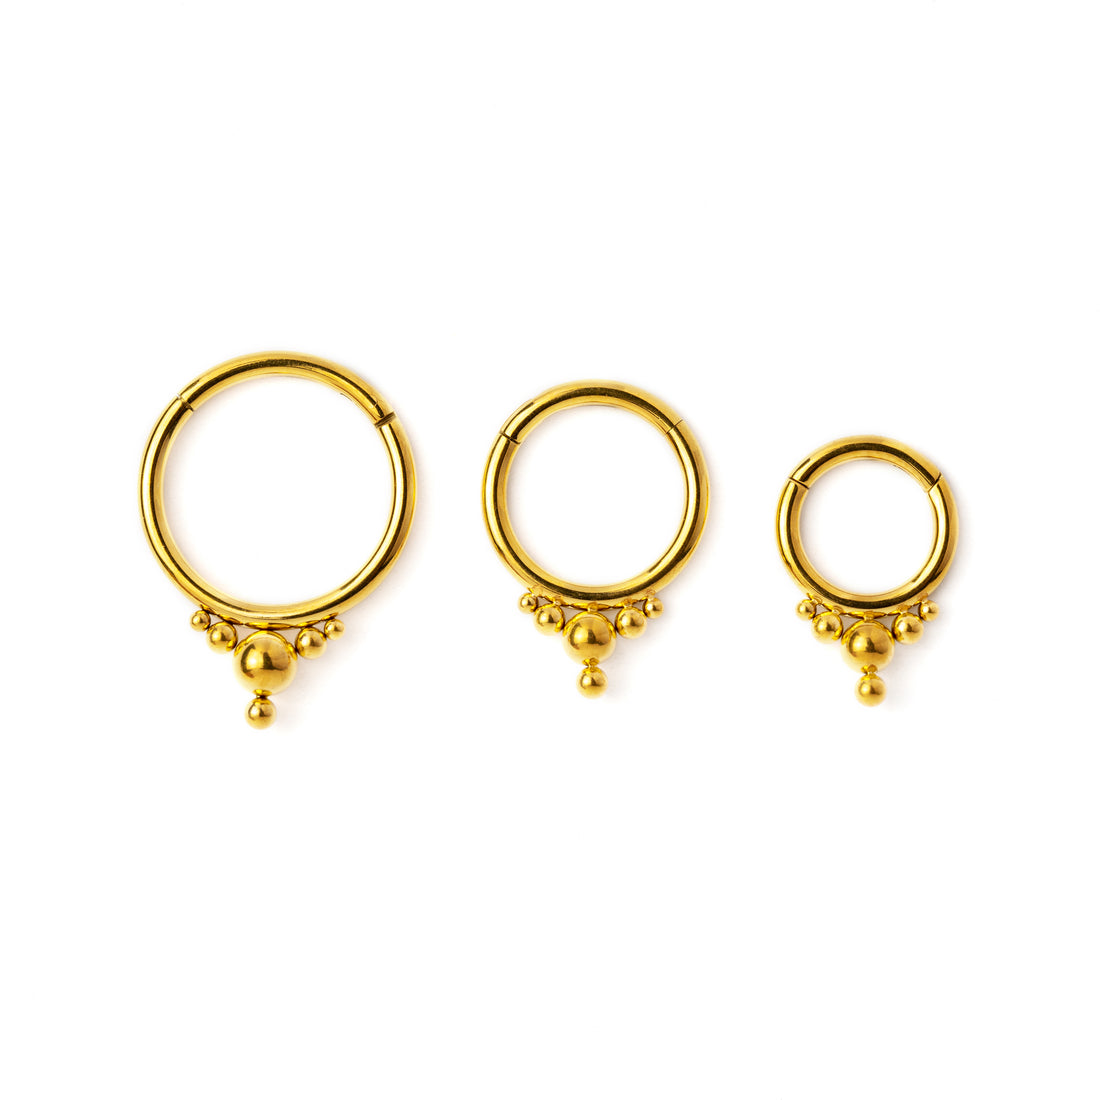 6mm, 8mm, 10mm Golden surgical steel Malee septum clickers